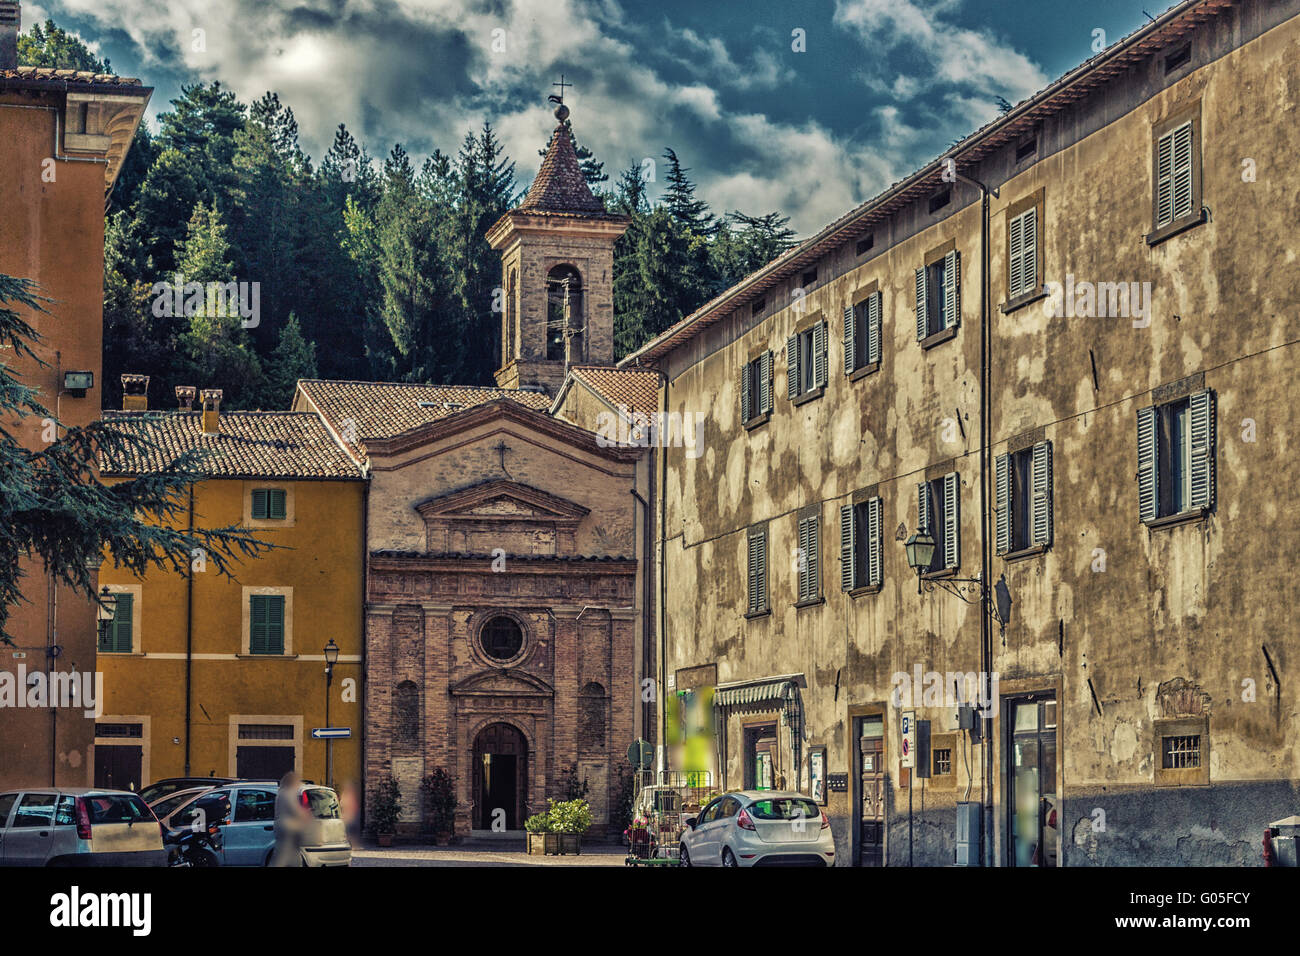 back in time and far from stress following the streets of a typical small hill village in the countryside of Romagna in northern Italy Stock Photo